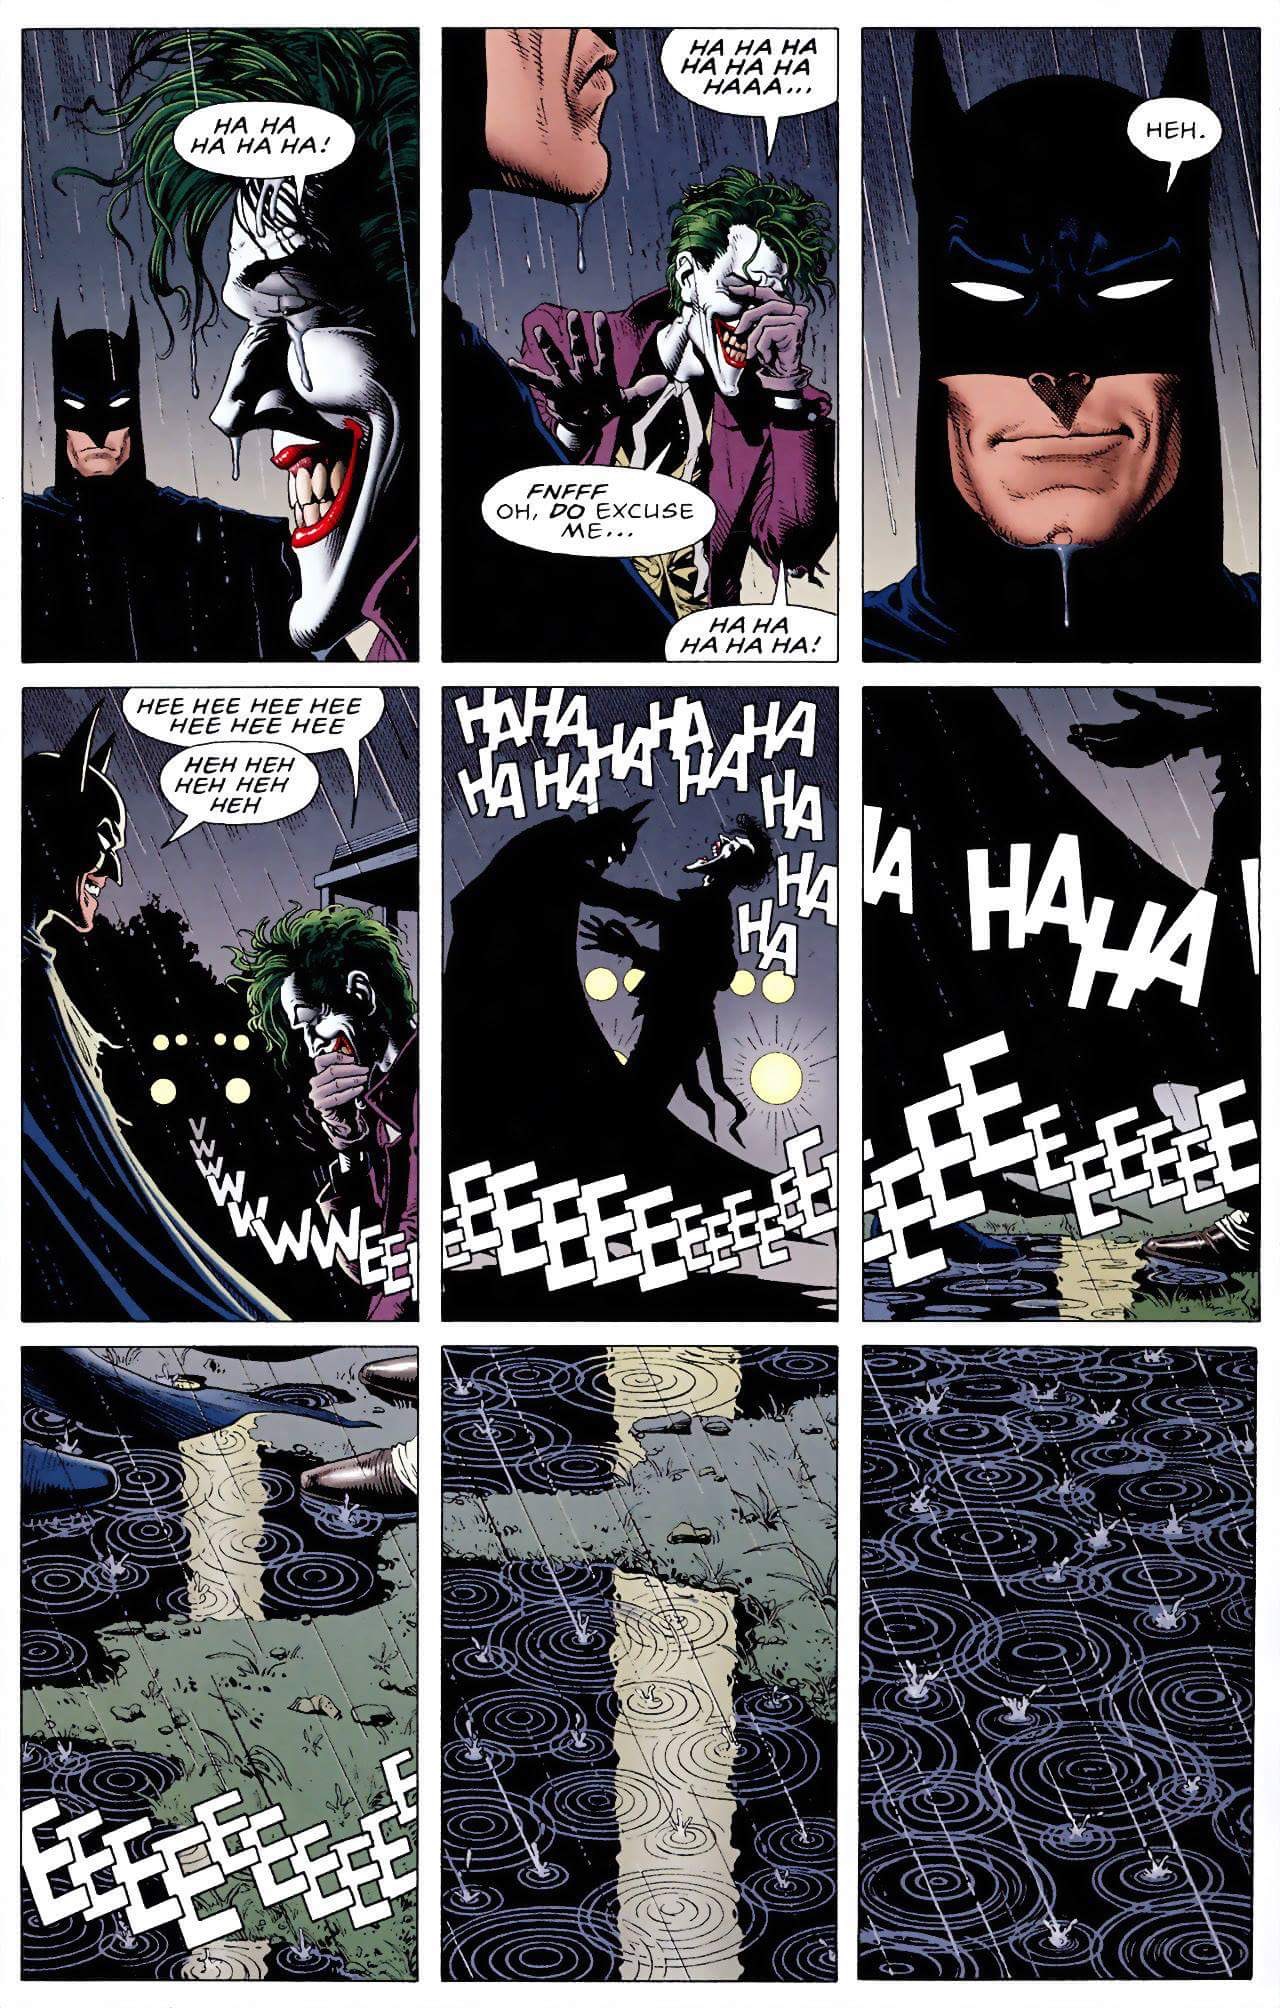 The ending page of the 1988 comic 'The Killing Joke'